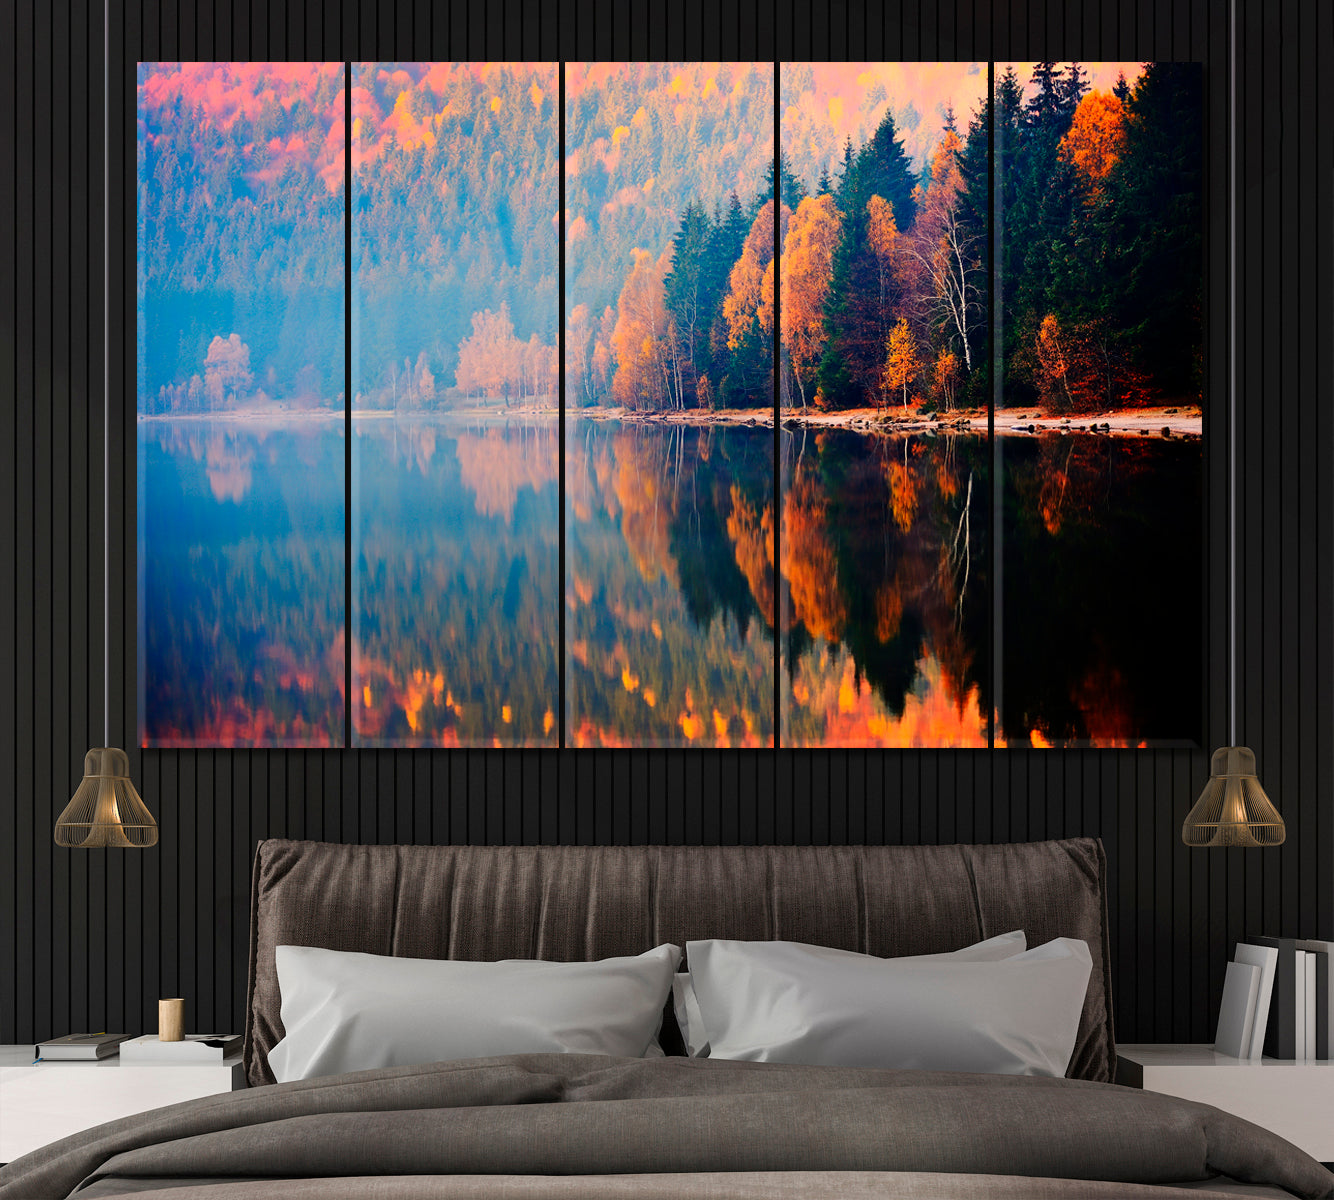 Autumn Landscape With Colorful Forest. St Anna Lake Romania Canvas Print ArtLexy 5 Panels 36"x24" inches 